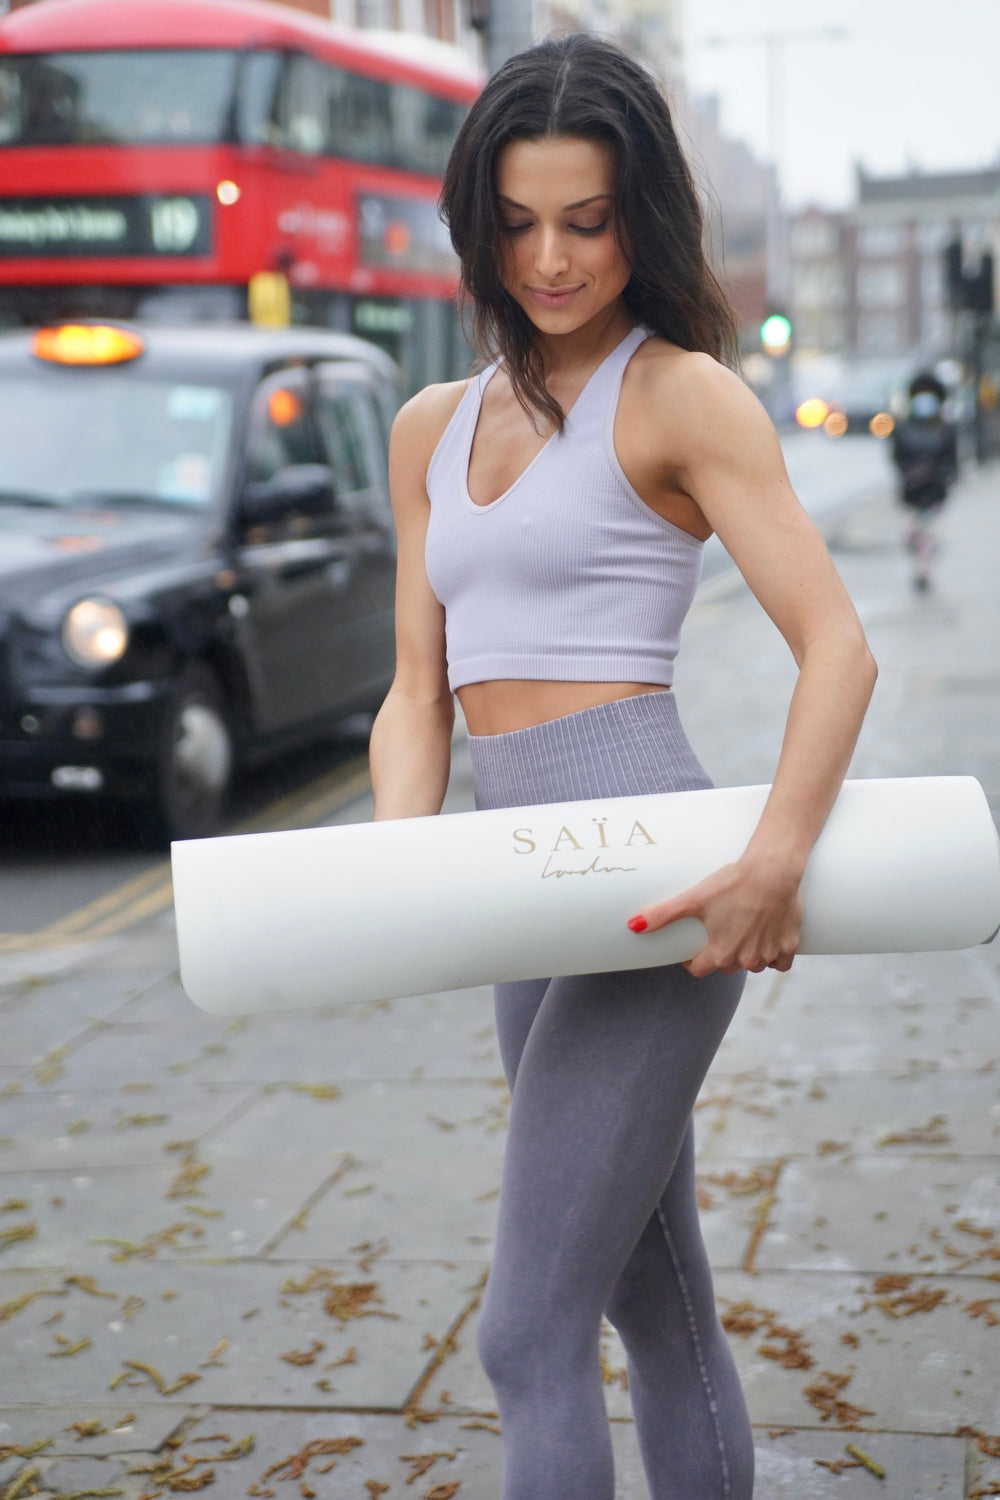 The Best Christmas Gifts for Yoga Lovers – SAÏA London